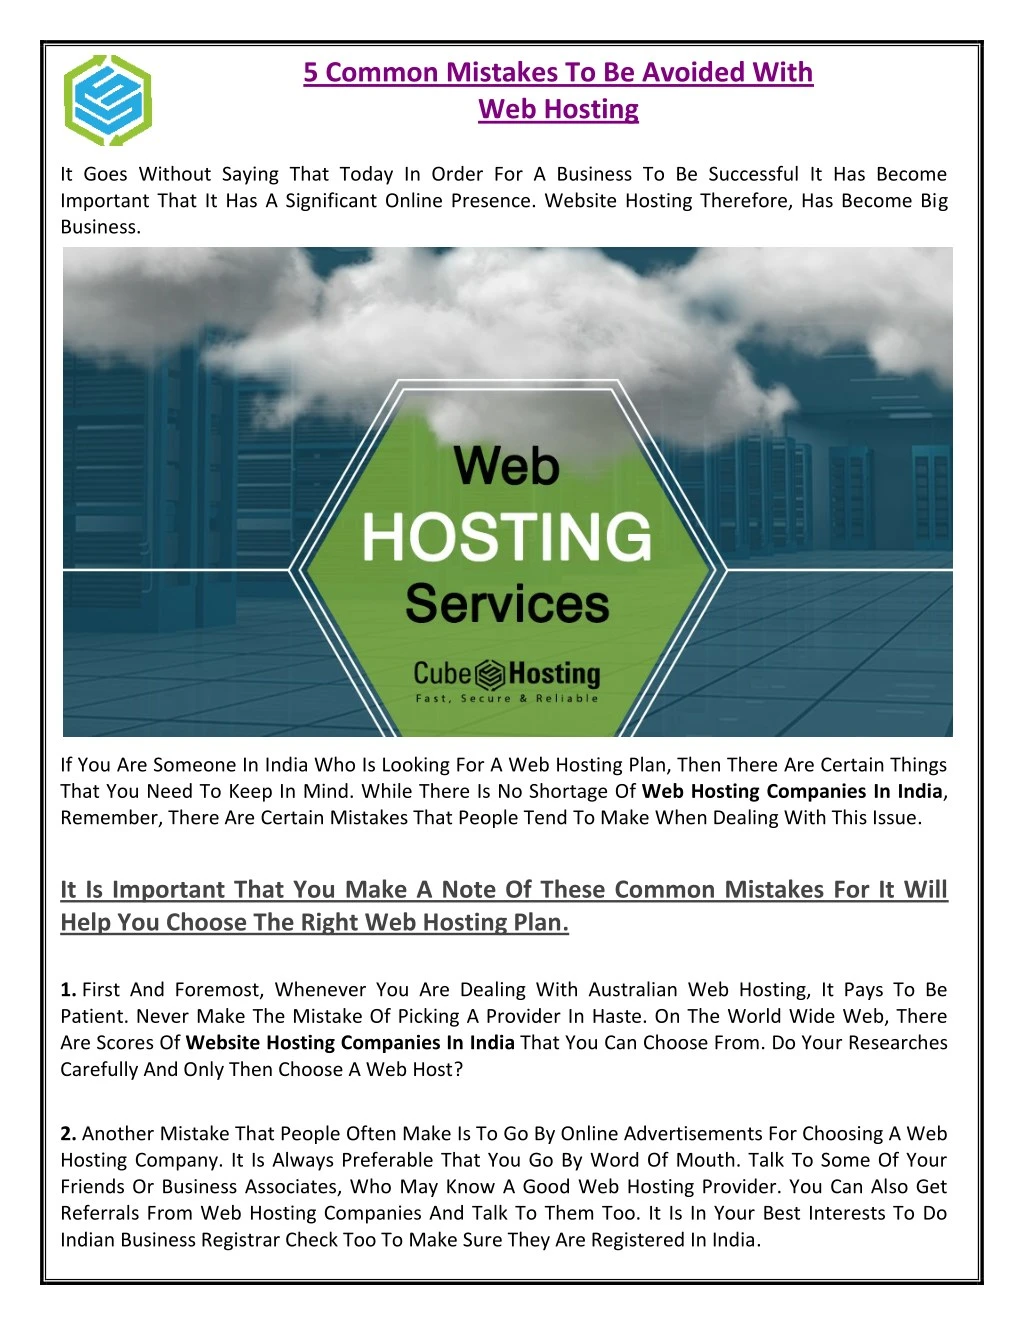 5 common mistakes to be avoided with web hosting